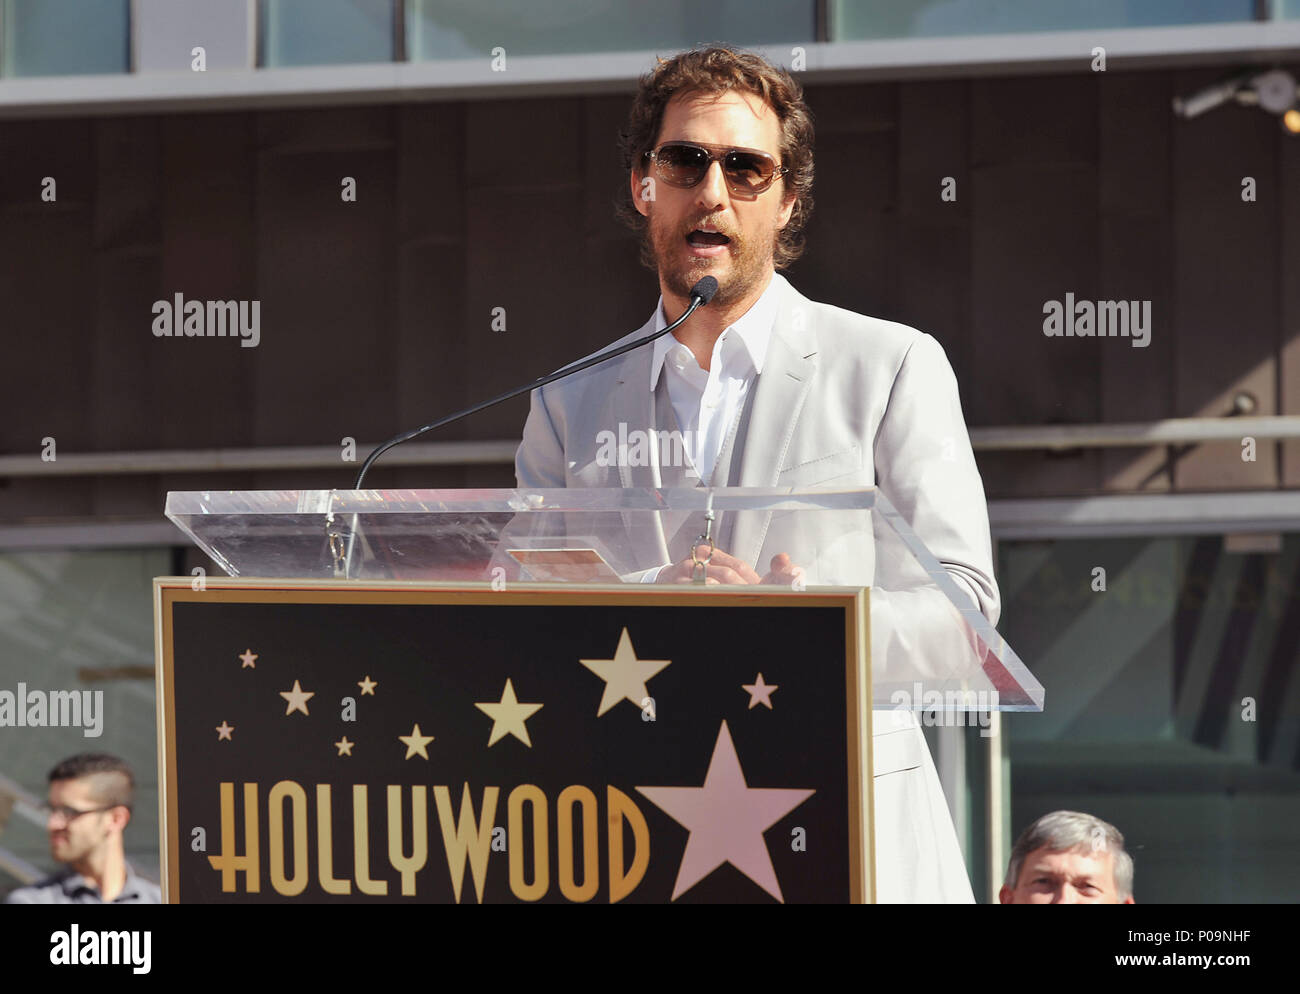 Matthew McConaughey Honored with a Star on the Hollywood Walk of Fame, November 17, 2014 in Los Angeles. a Matthew McConaughey - Star 034 a Matthew McConaughey - Star 034   Event in Hollywood Life - California, Red Carpet Event, USA, Film Industry, Celebrities, Photography, Bestof, Arts Culture and Entertainment, Topix Celebrities fashion, Best of, Hollywood Life, Event in Hollywood Life - California, movie celebrities, TV celebrities, Music celebrities, Topix, Bestof, Arts Culture and Entertainment, Photography,    inquiry tsuni@Gamma-USA.com , Credit Tsuni / USA, Honored with a Star on the H Stock Photo